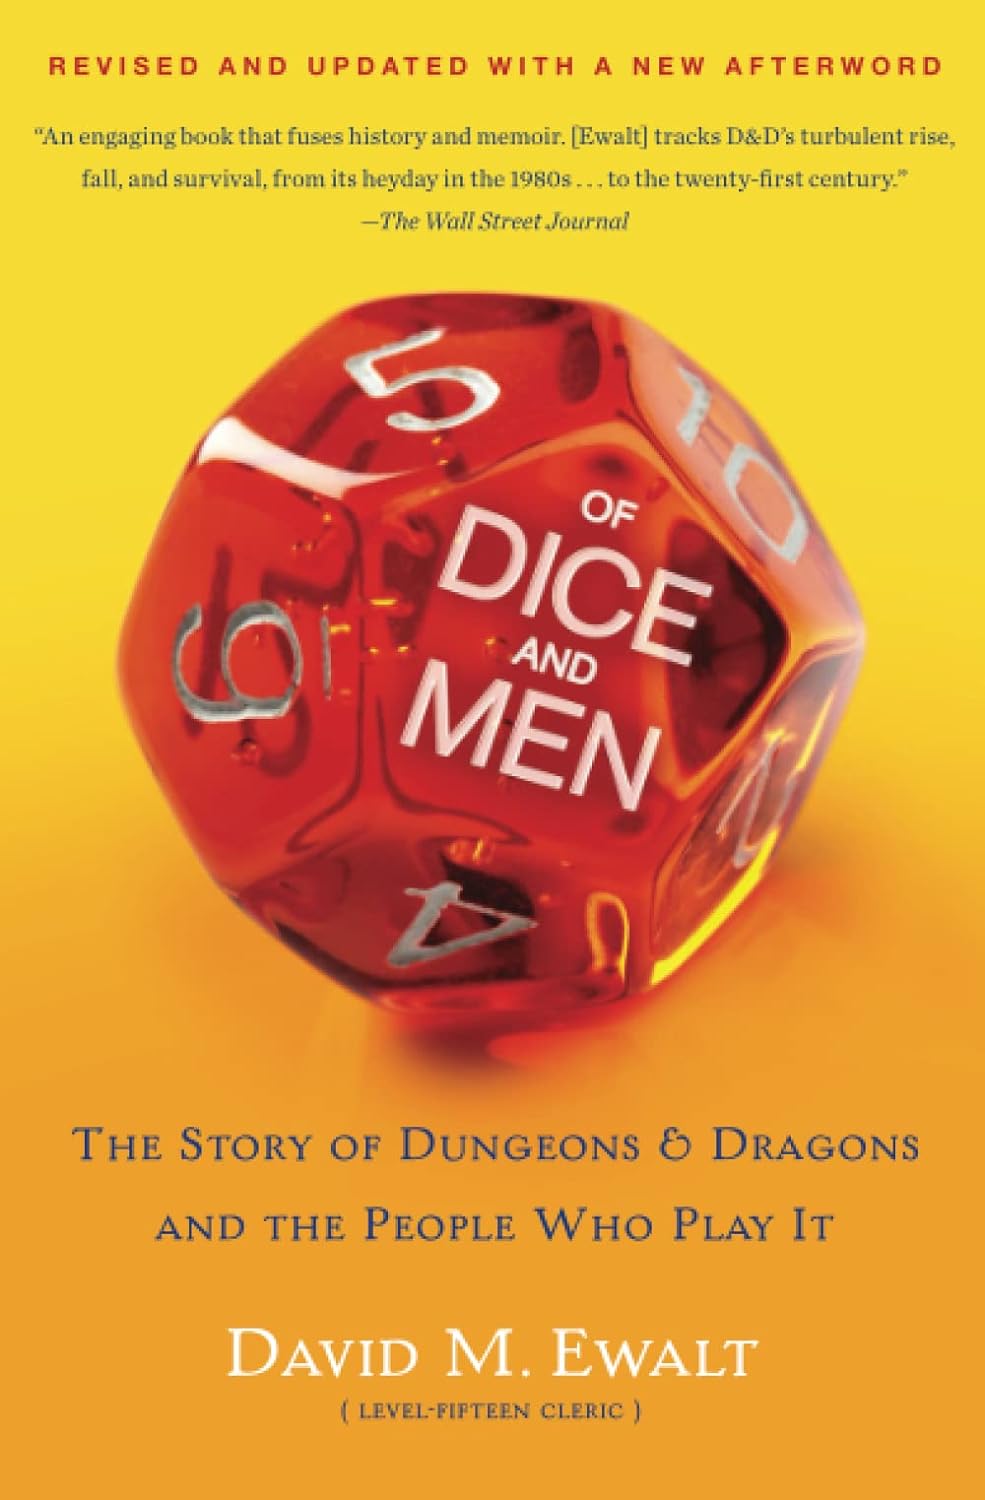 Books on the history of D&D